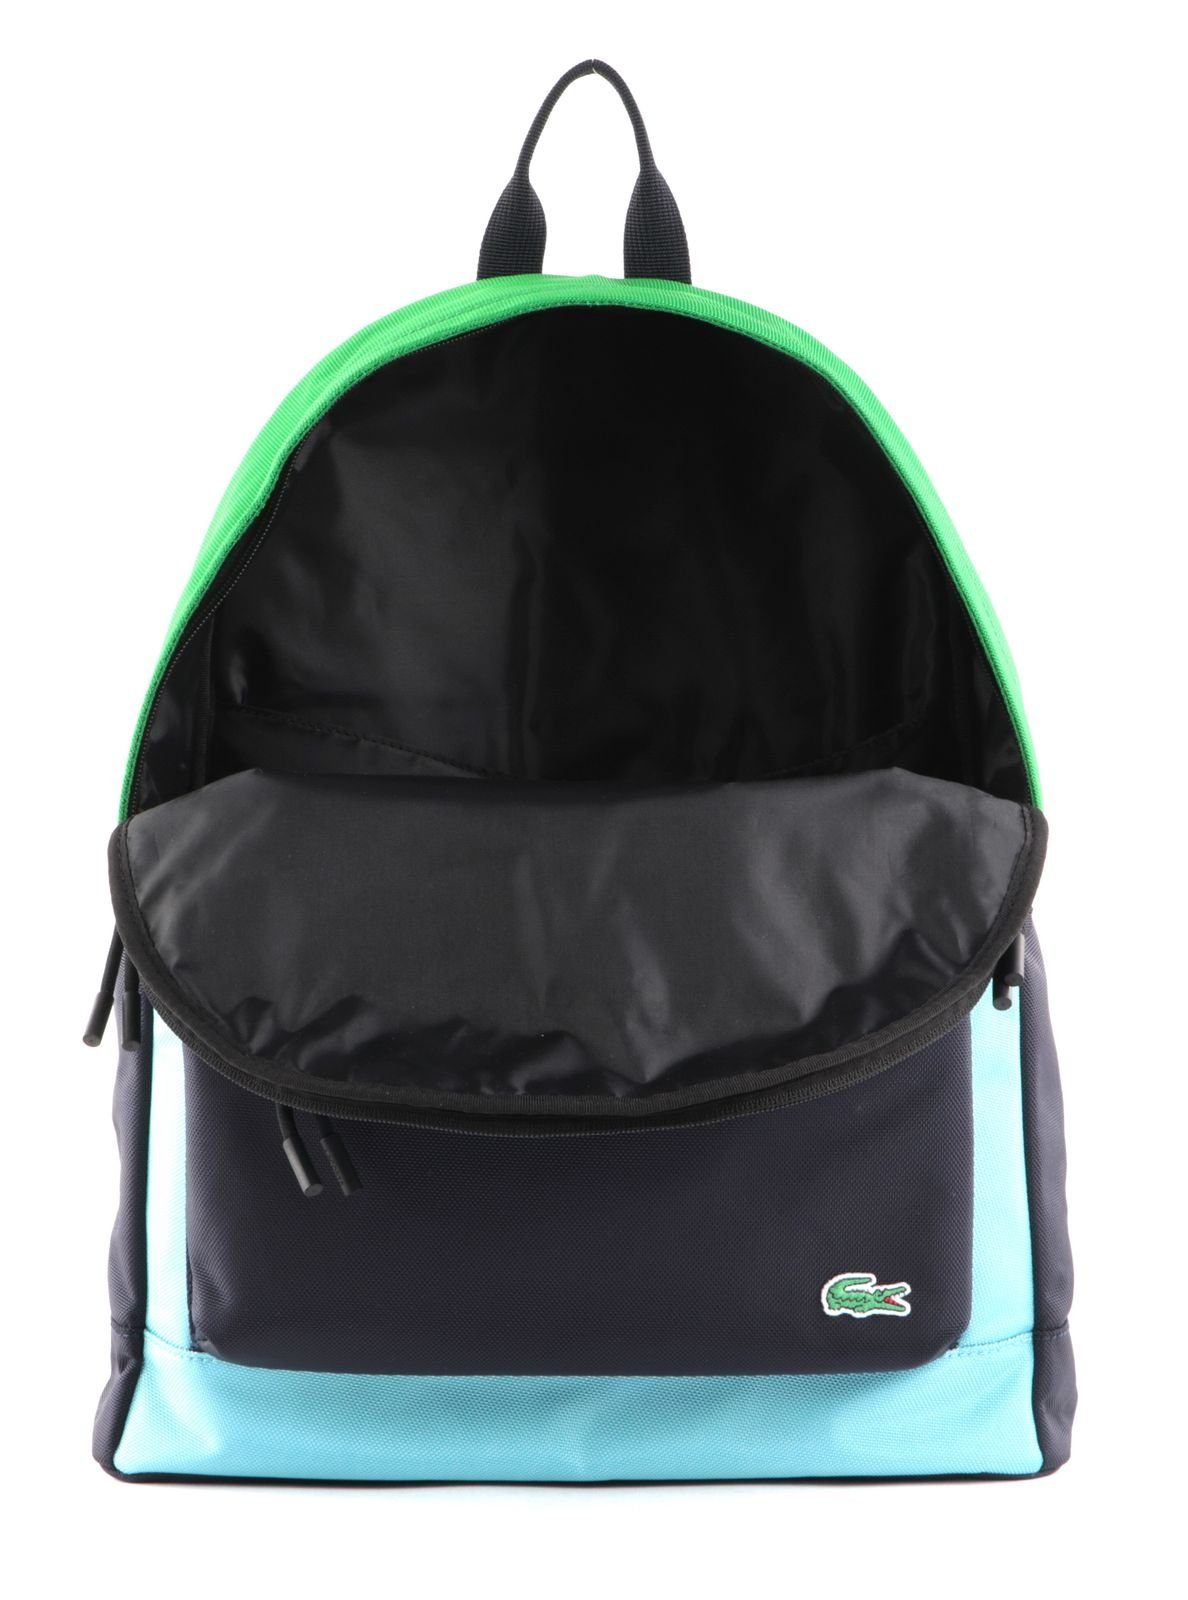 Rucksack Package Azur Holiday Abime Malachite Lacoste